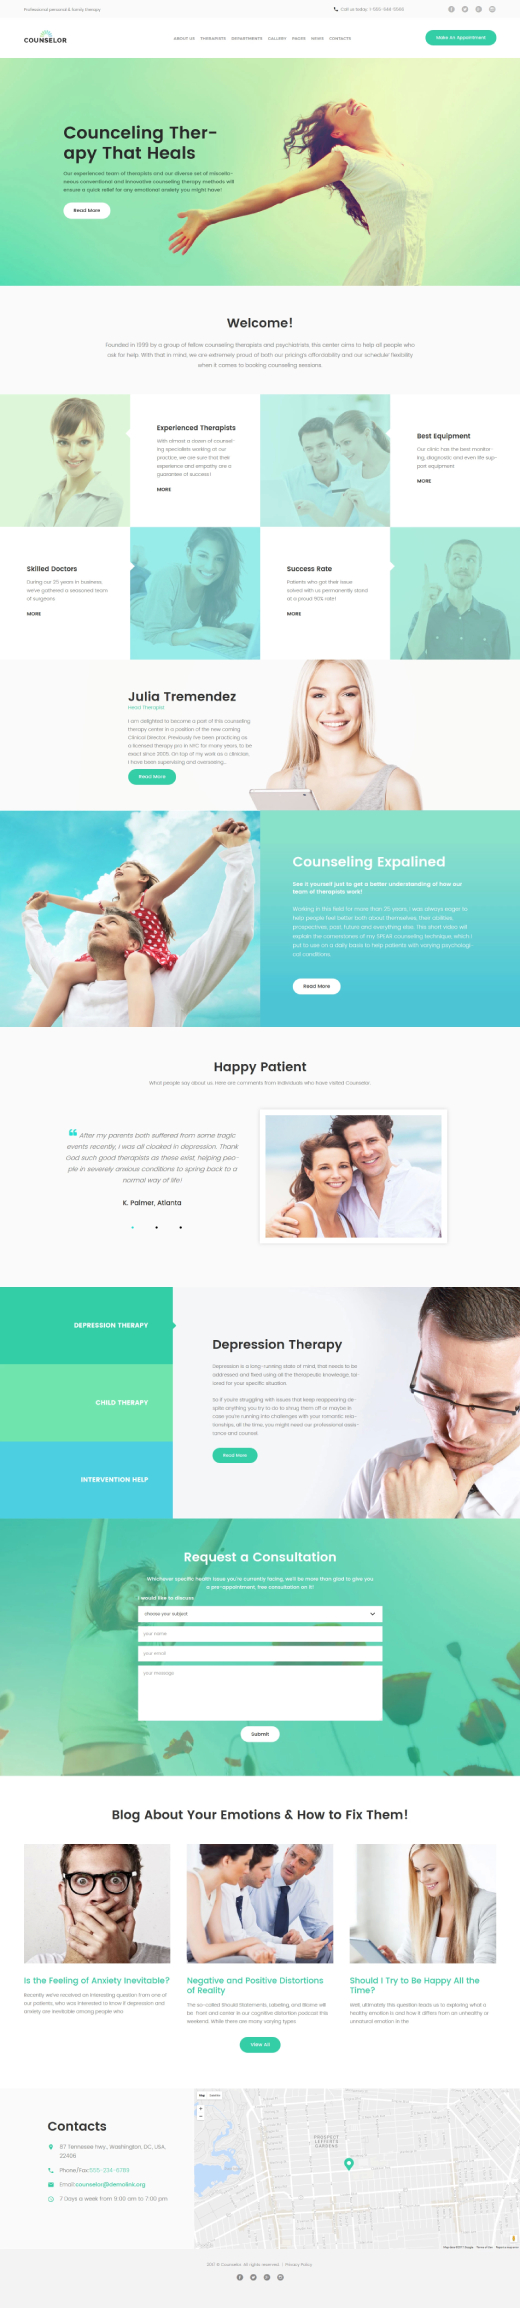  Counselor - Counseling Therapy Center Responsive WordPress Theme